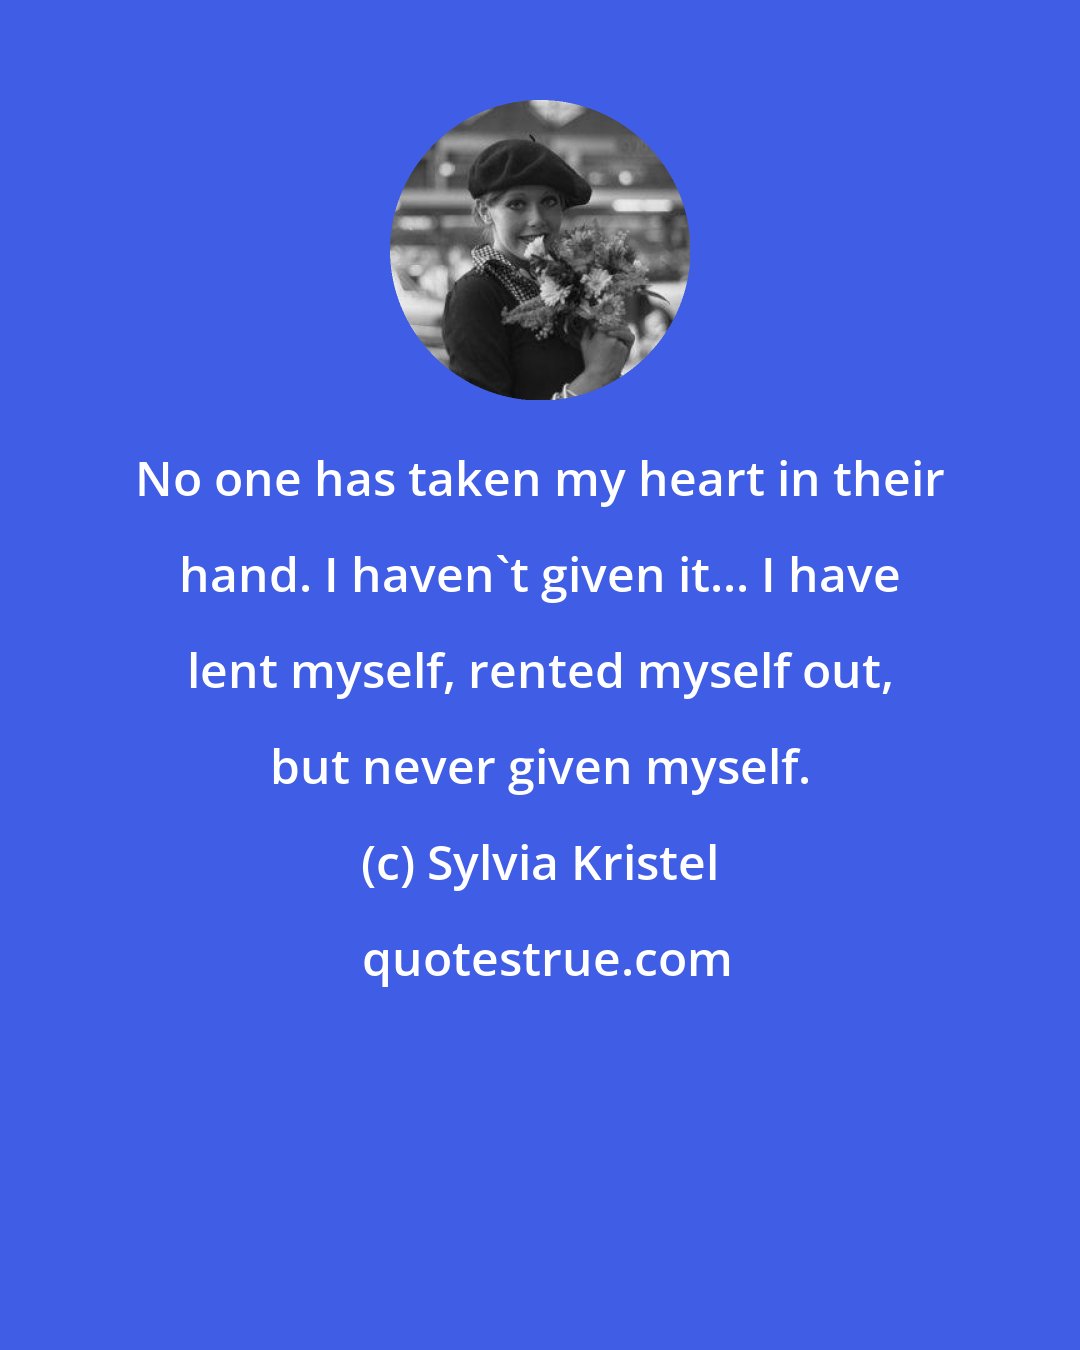 Sylvia Kristel: No one has taken my heart in their hand. I haven't given it... I have lent myself, rented myself out, but never given myself.